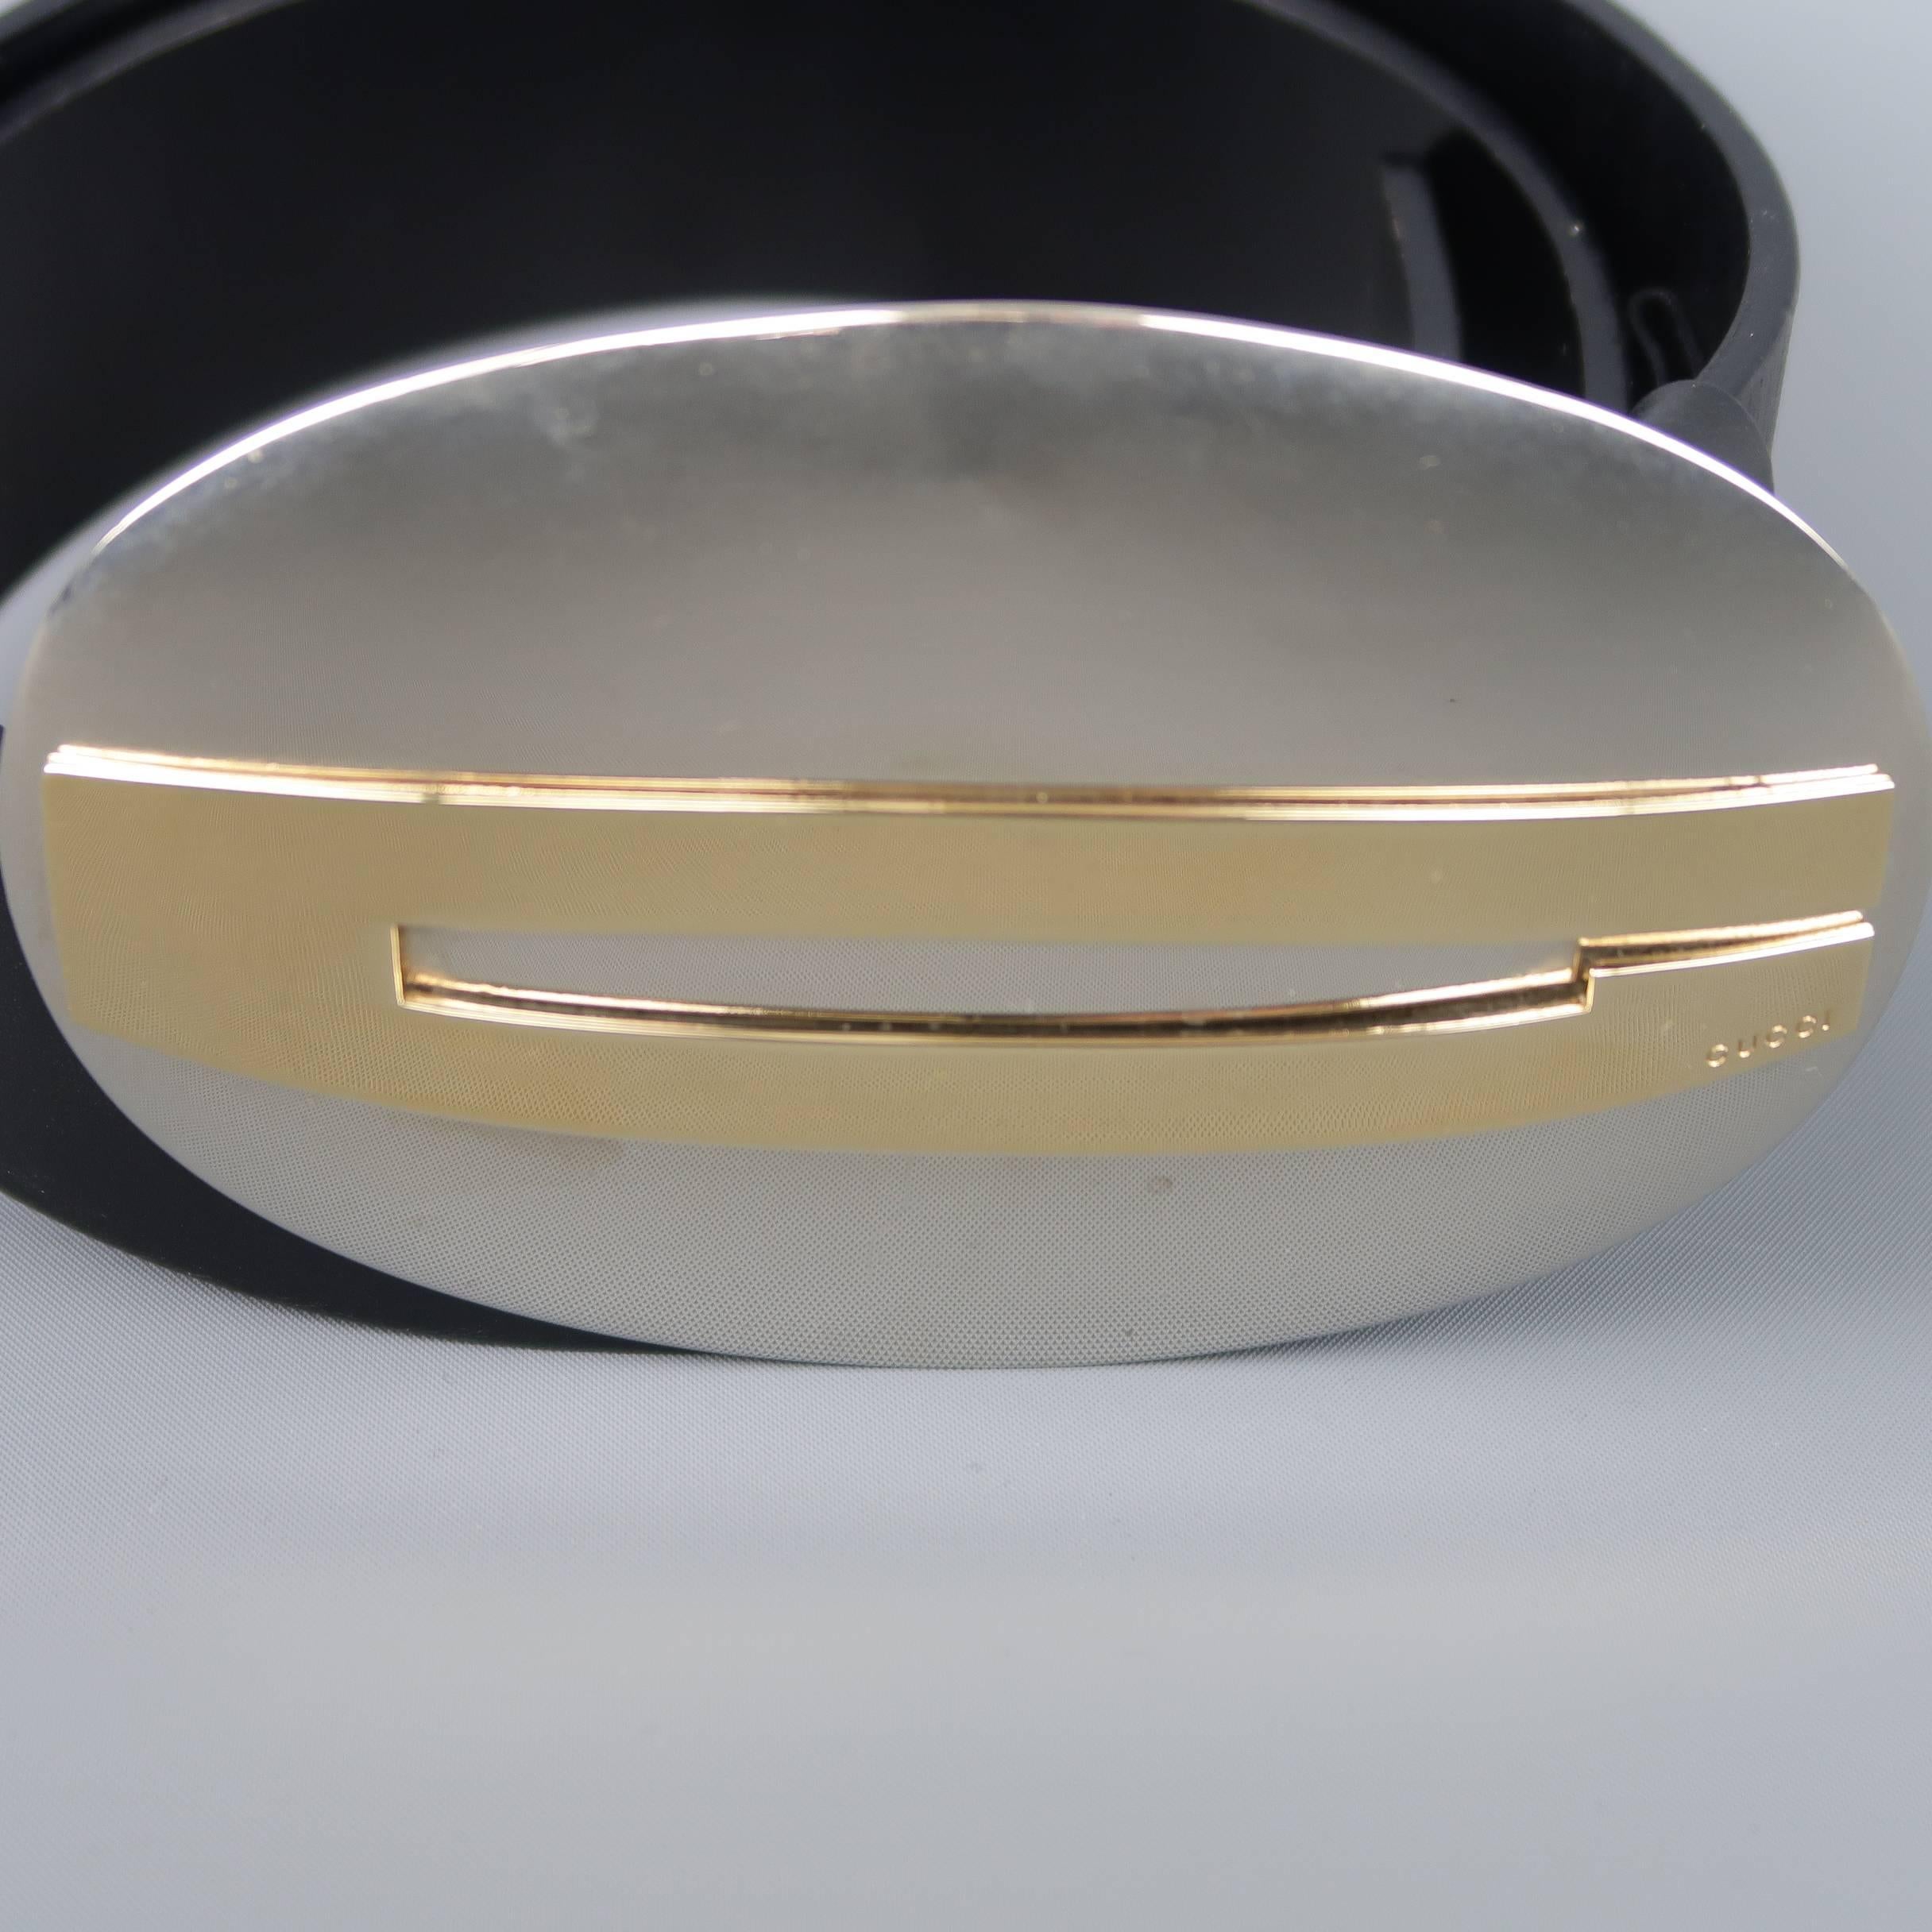 Archive GUCCI belt features an oversized polished silver tone metal buckle with gold tone G on a black leather strap. Minor aging on buckle. As-is. Made in Italy.
 
Good Pre-Owned Condition.
Marked: 85.34
 
Measurements:
 
Length: 36.5 in.
Width: